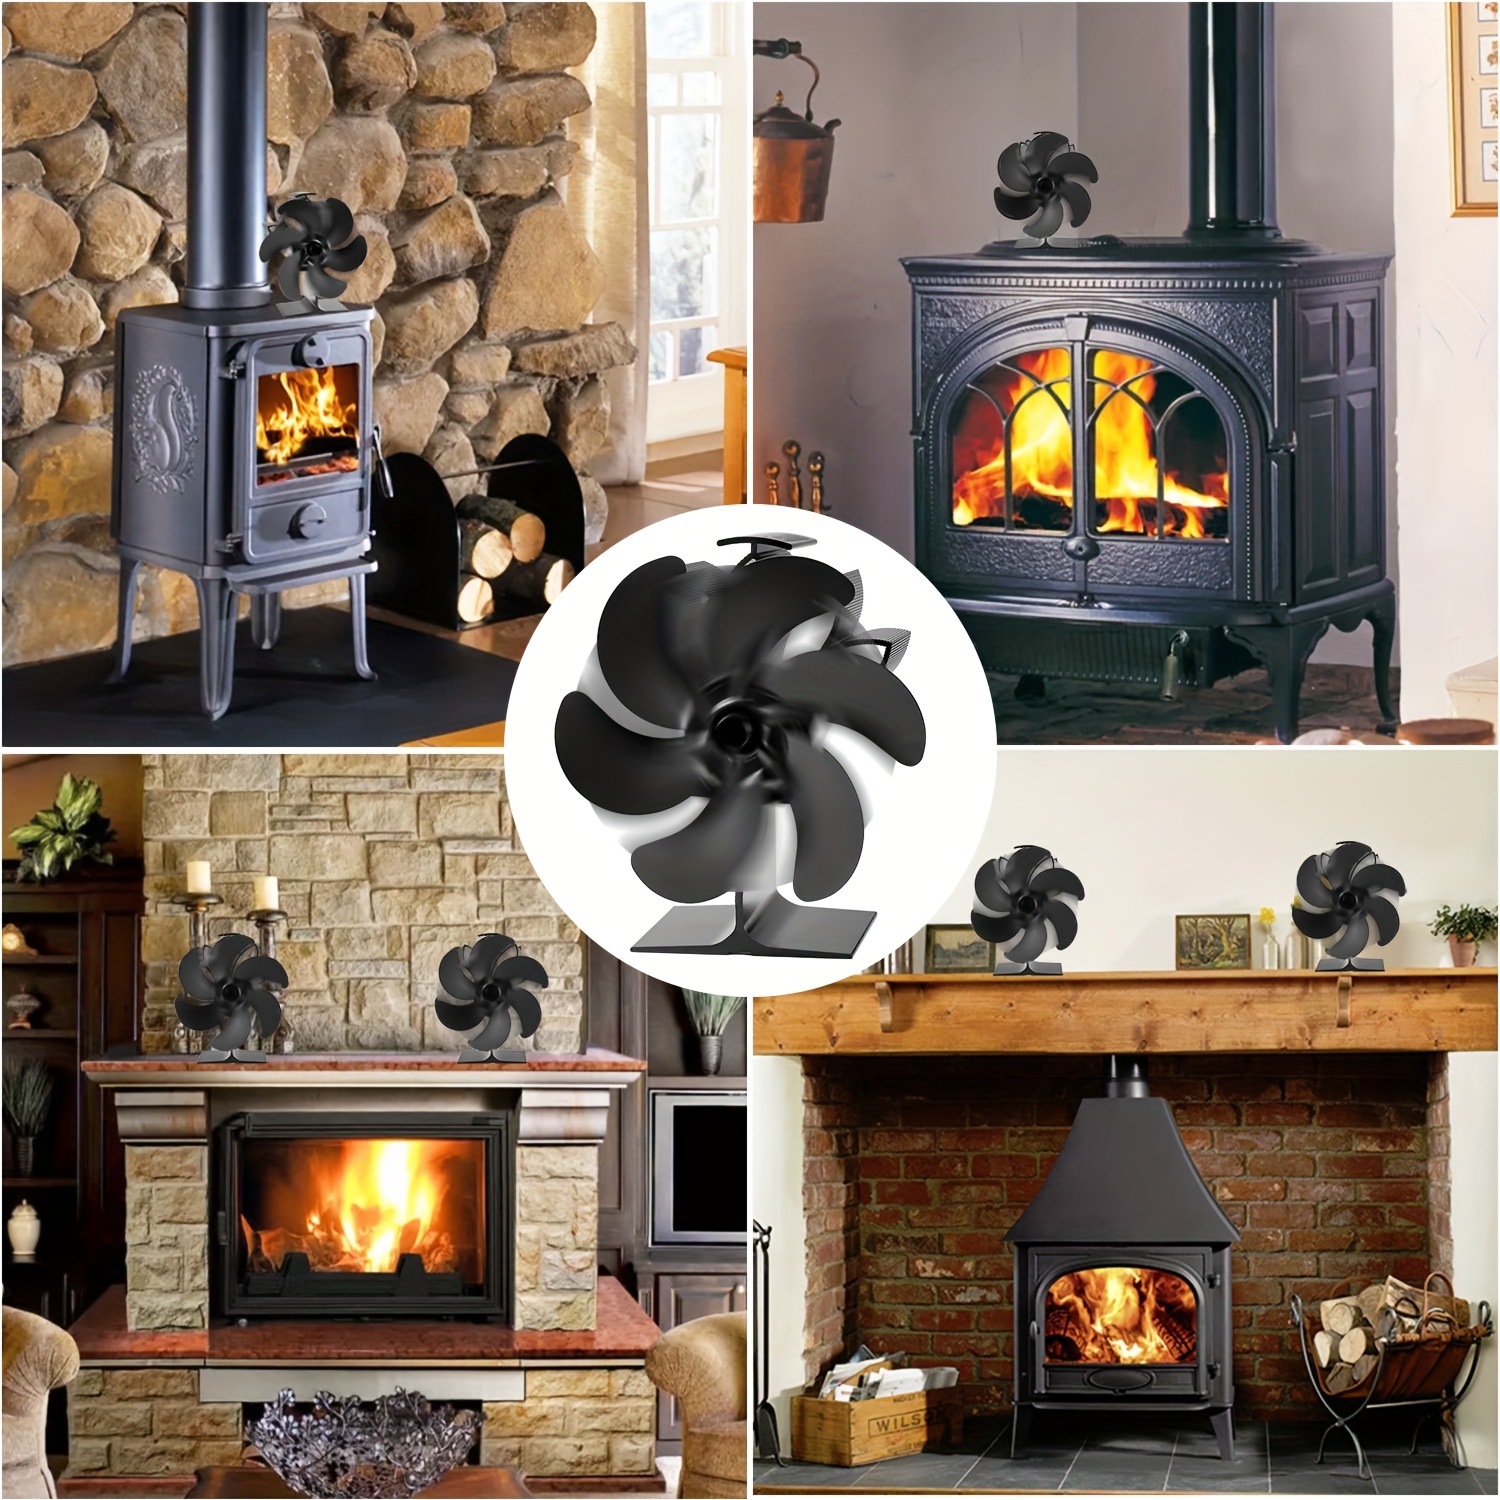 6 Blades Wood Stove Fan Heat Powered Fireplace Fan + Thermometer for Log  Burner